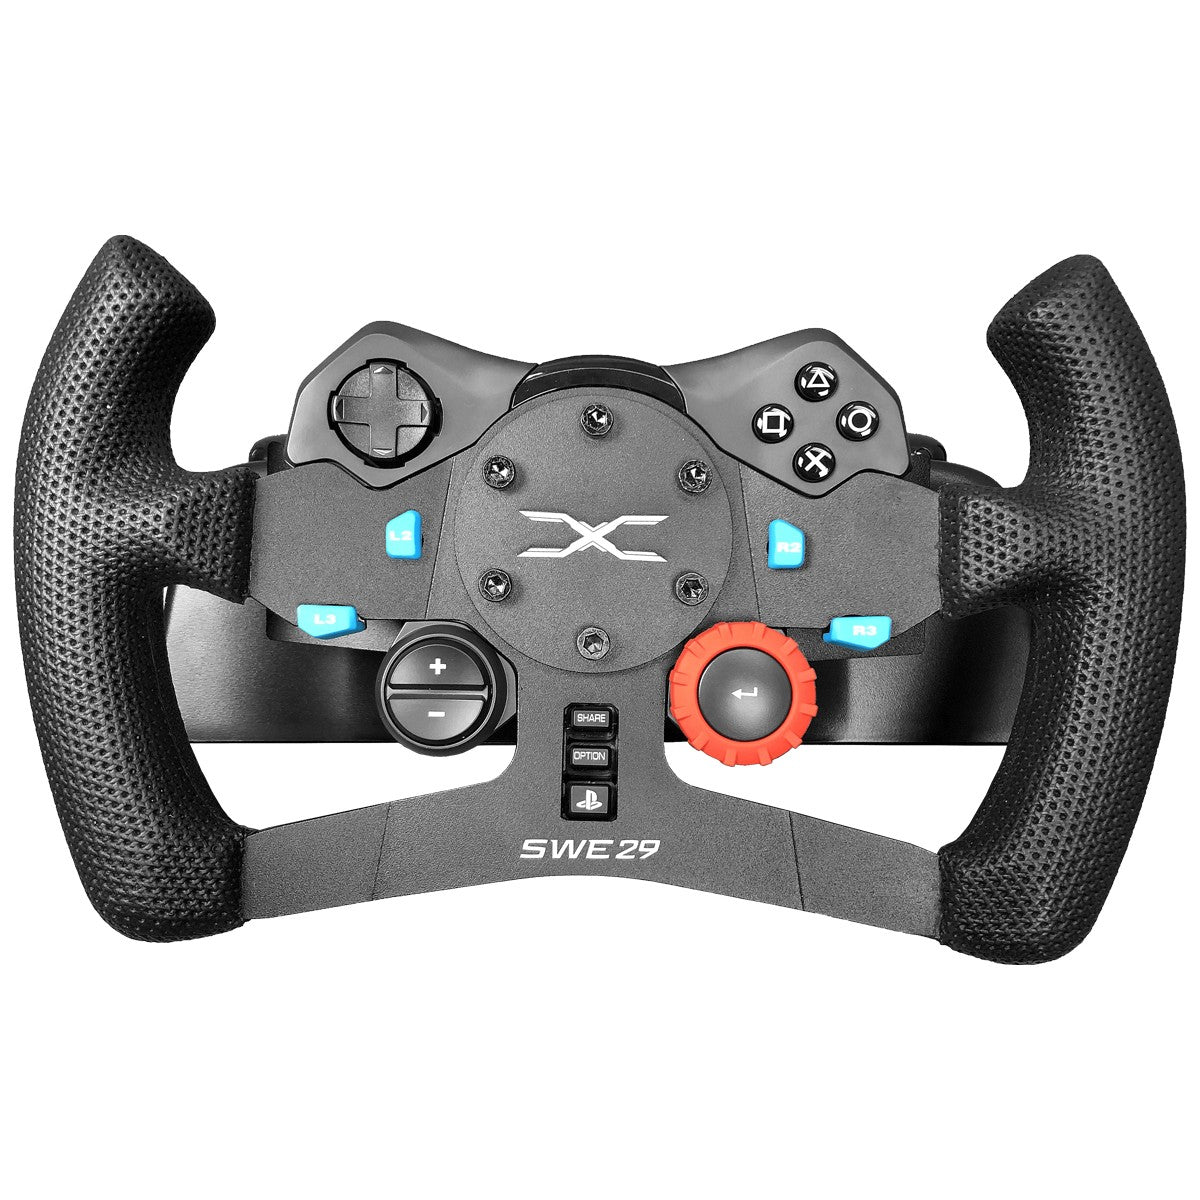 ADD ON SWE 29 FOR LOGITECH (For Logitech G29) - Extreme